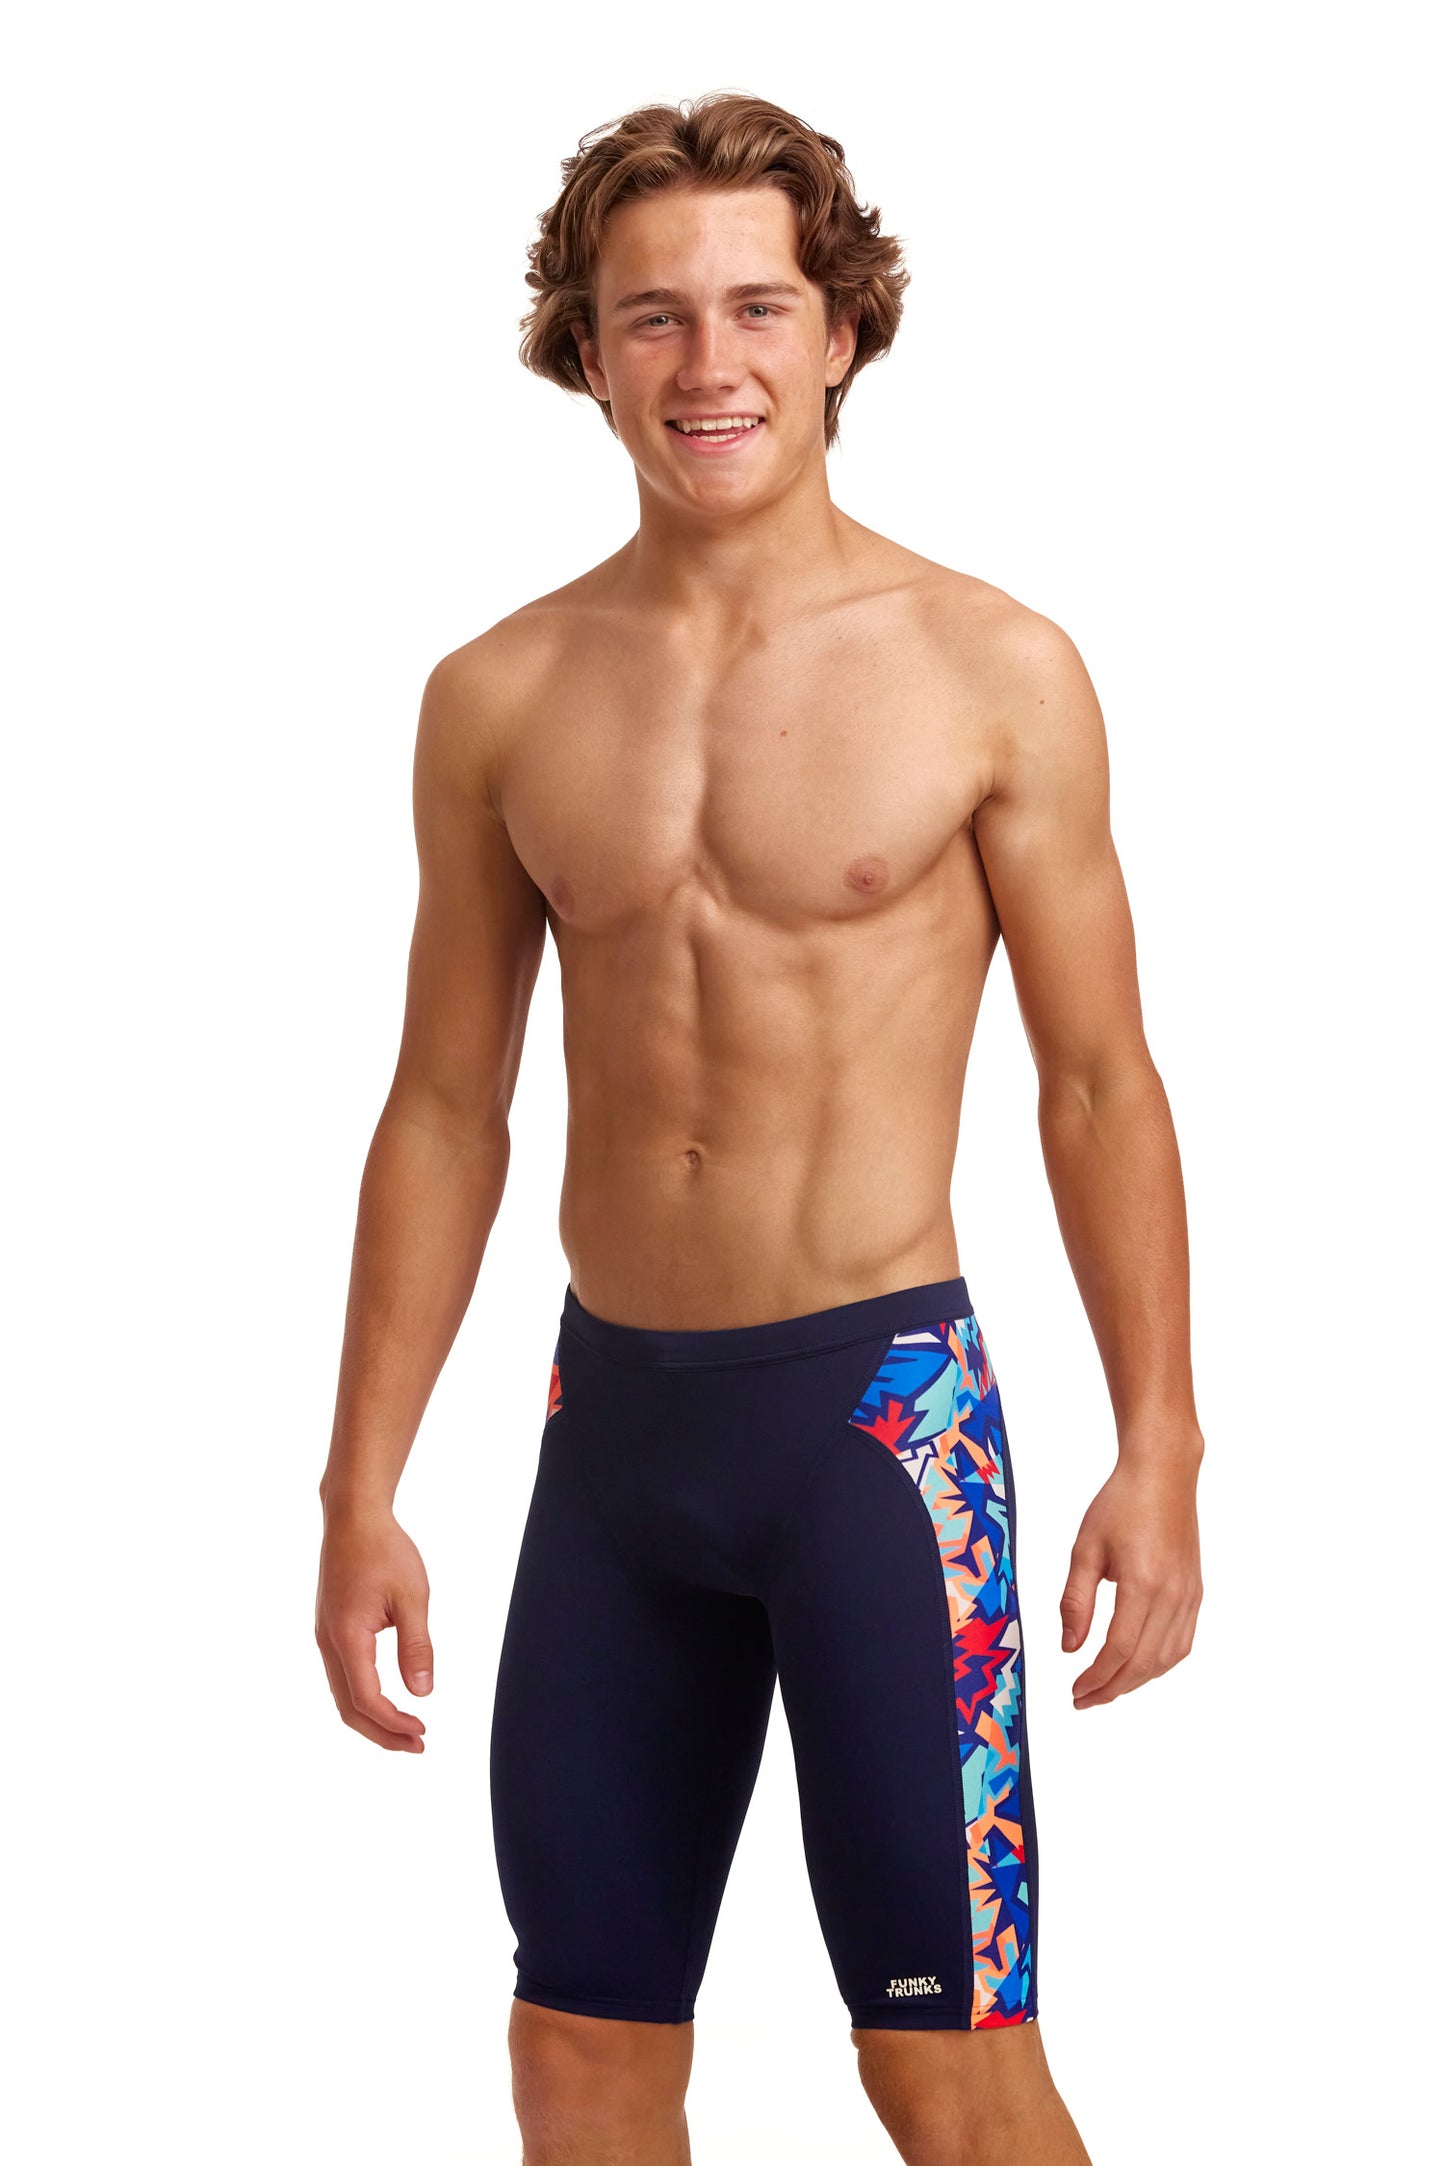 Funky Trunks Boys Training Jammers Saw Sea